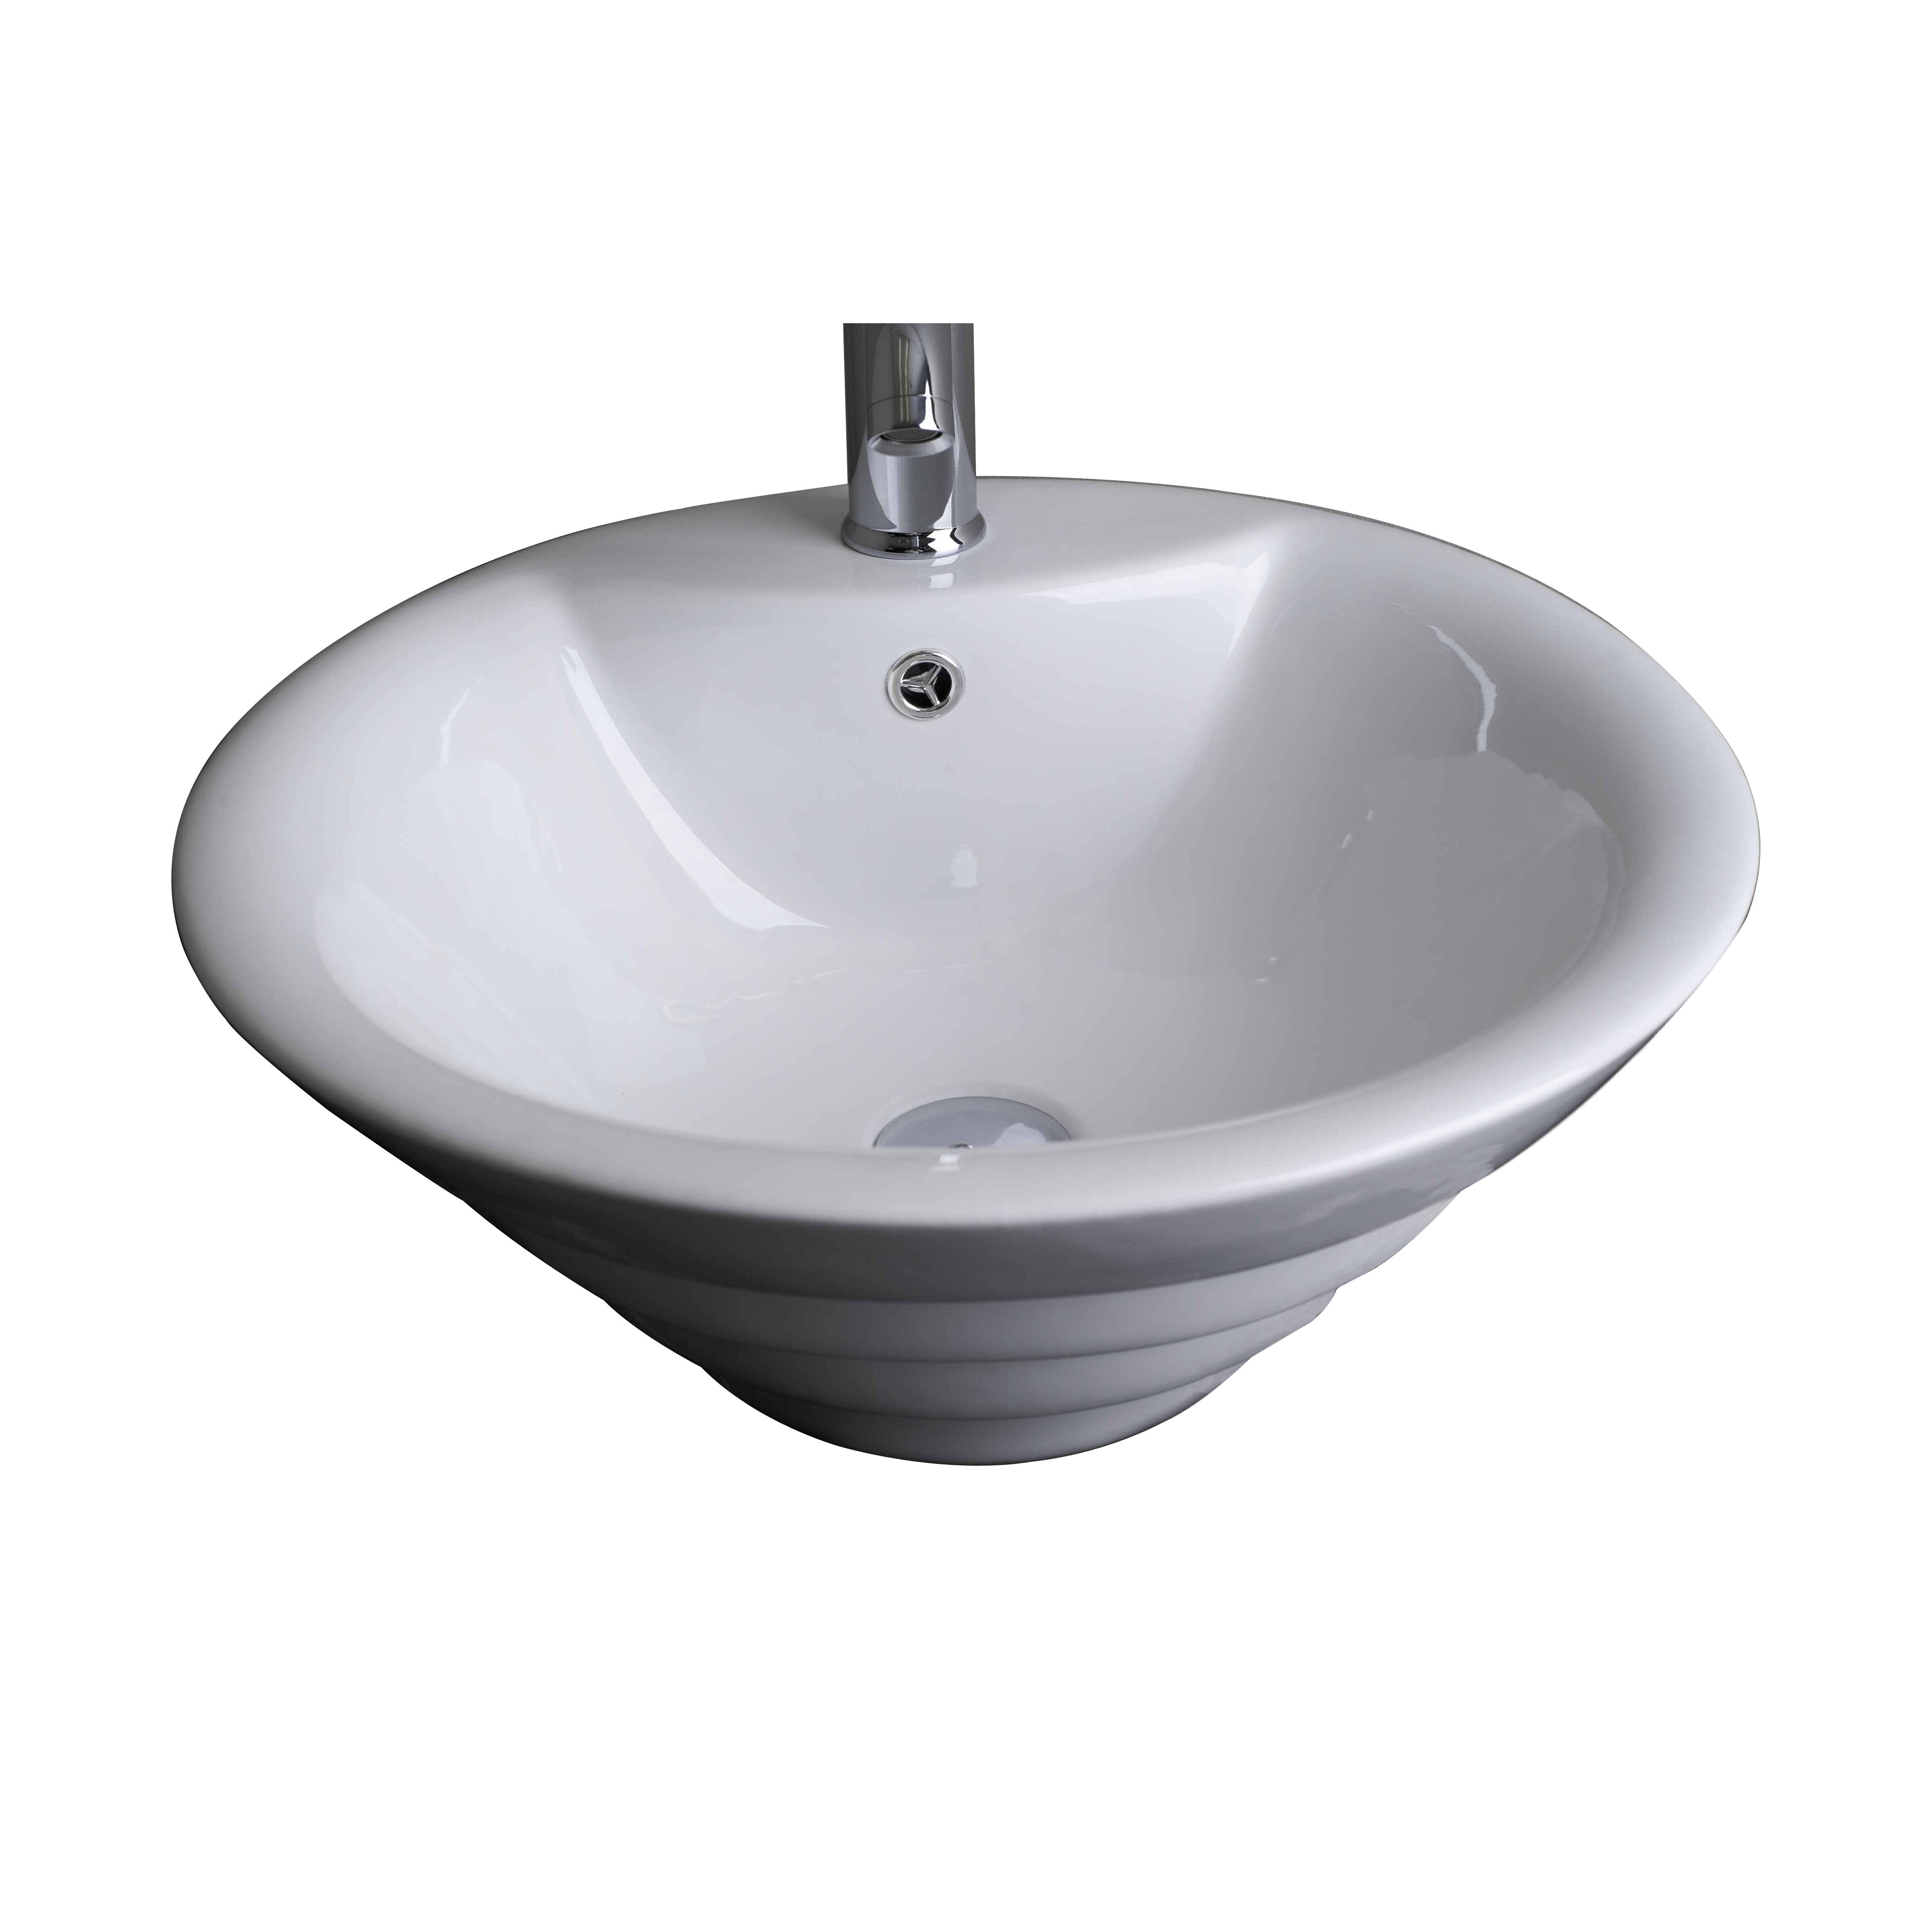 Bathroom Sink Counter above counter rectangle vessel